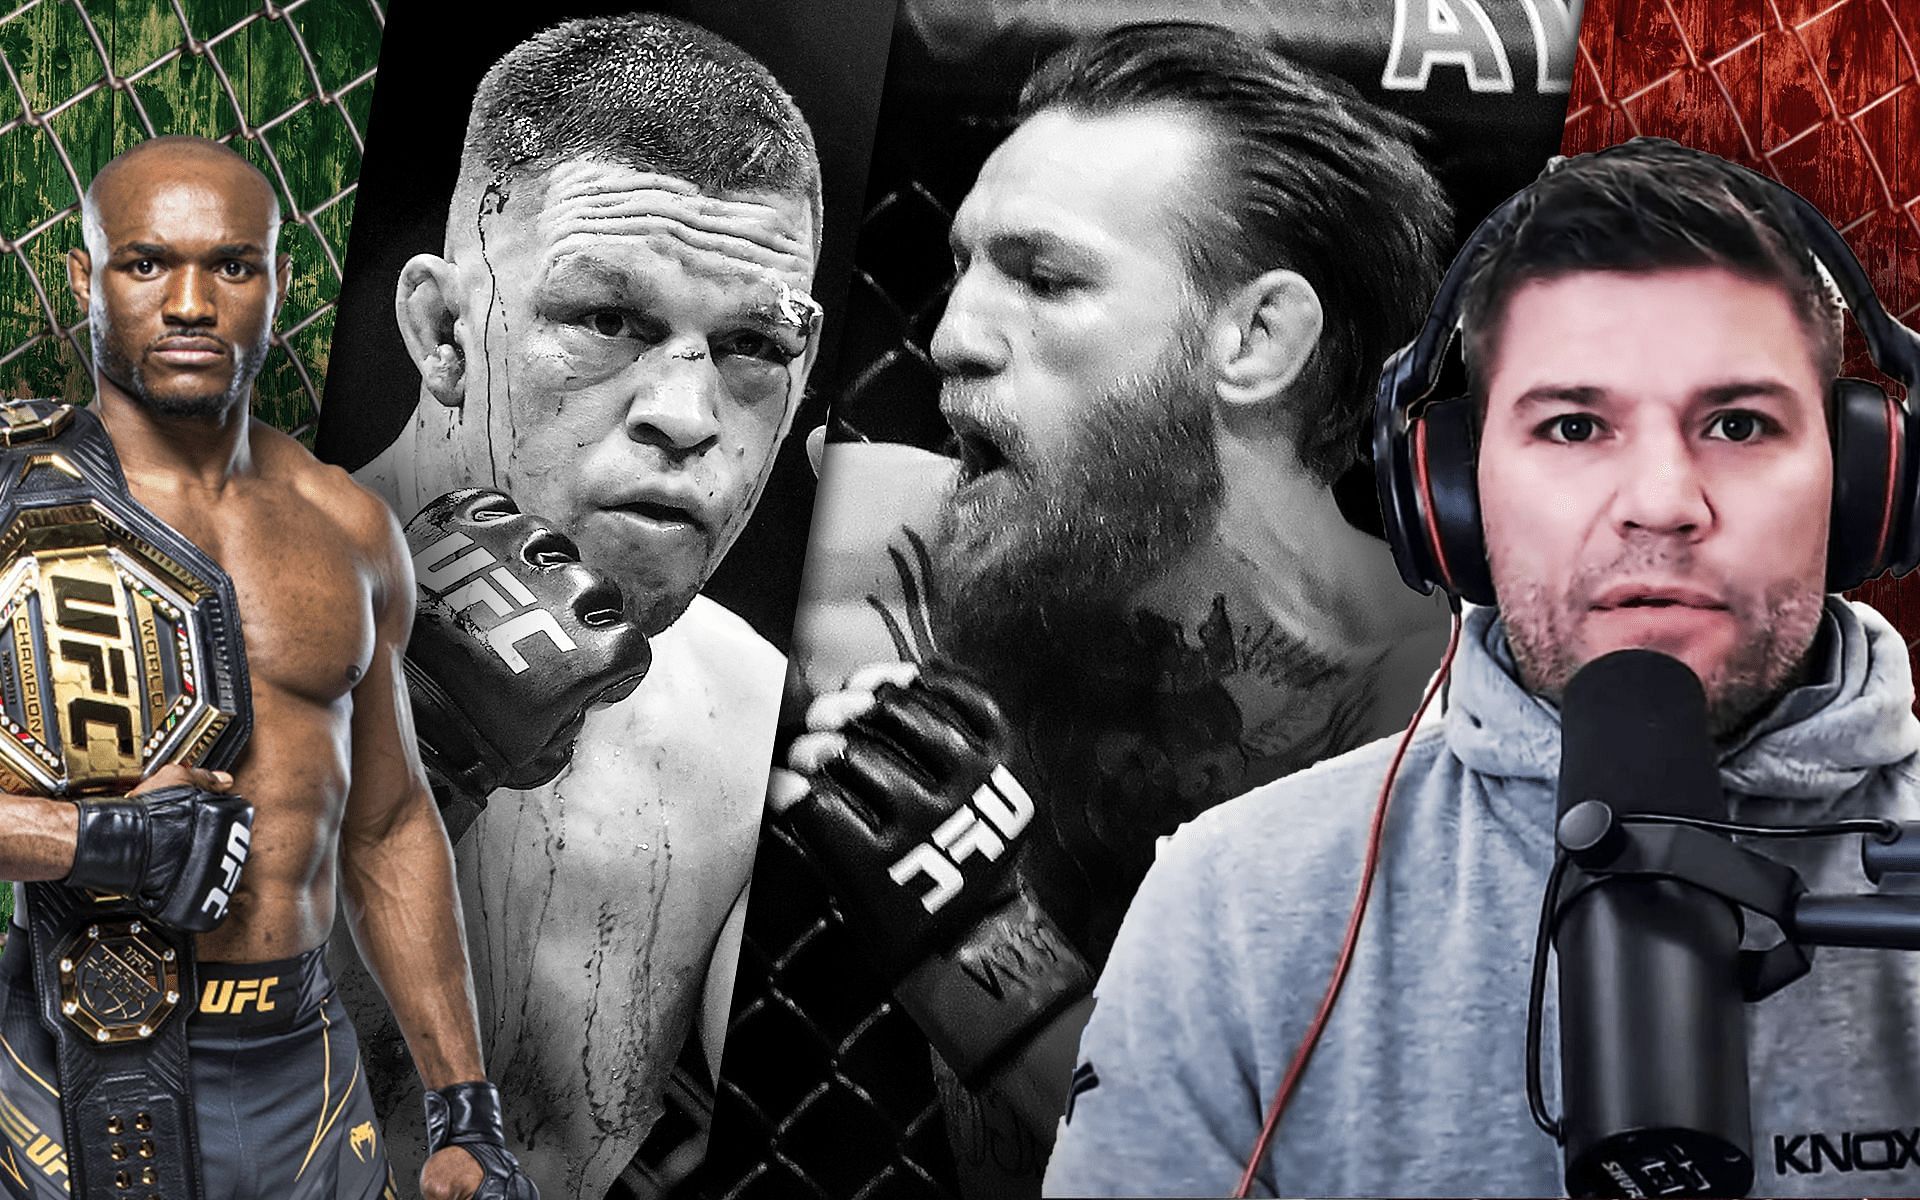 Josh Thompson (R) believes Conor McGregor (M) could get a shot at Kamaru Usman (L) with a win over Nate Diaz (M) [Image Credits: Weighing In Podcast, UFC. com, and Getty Images]